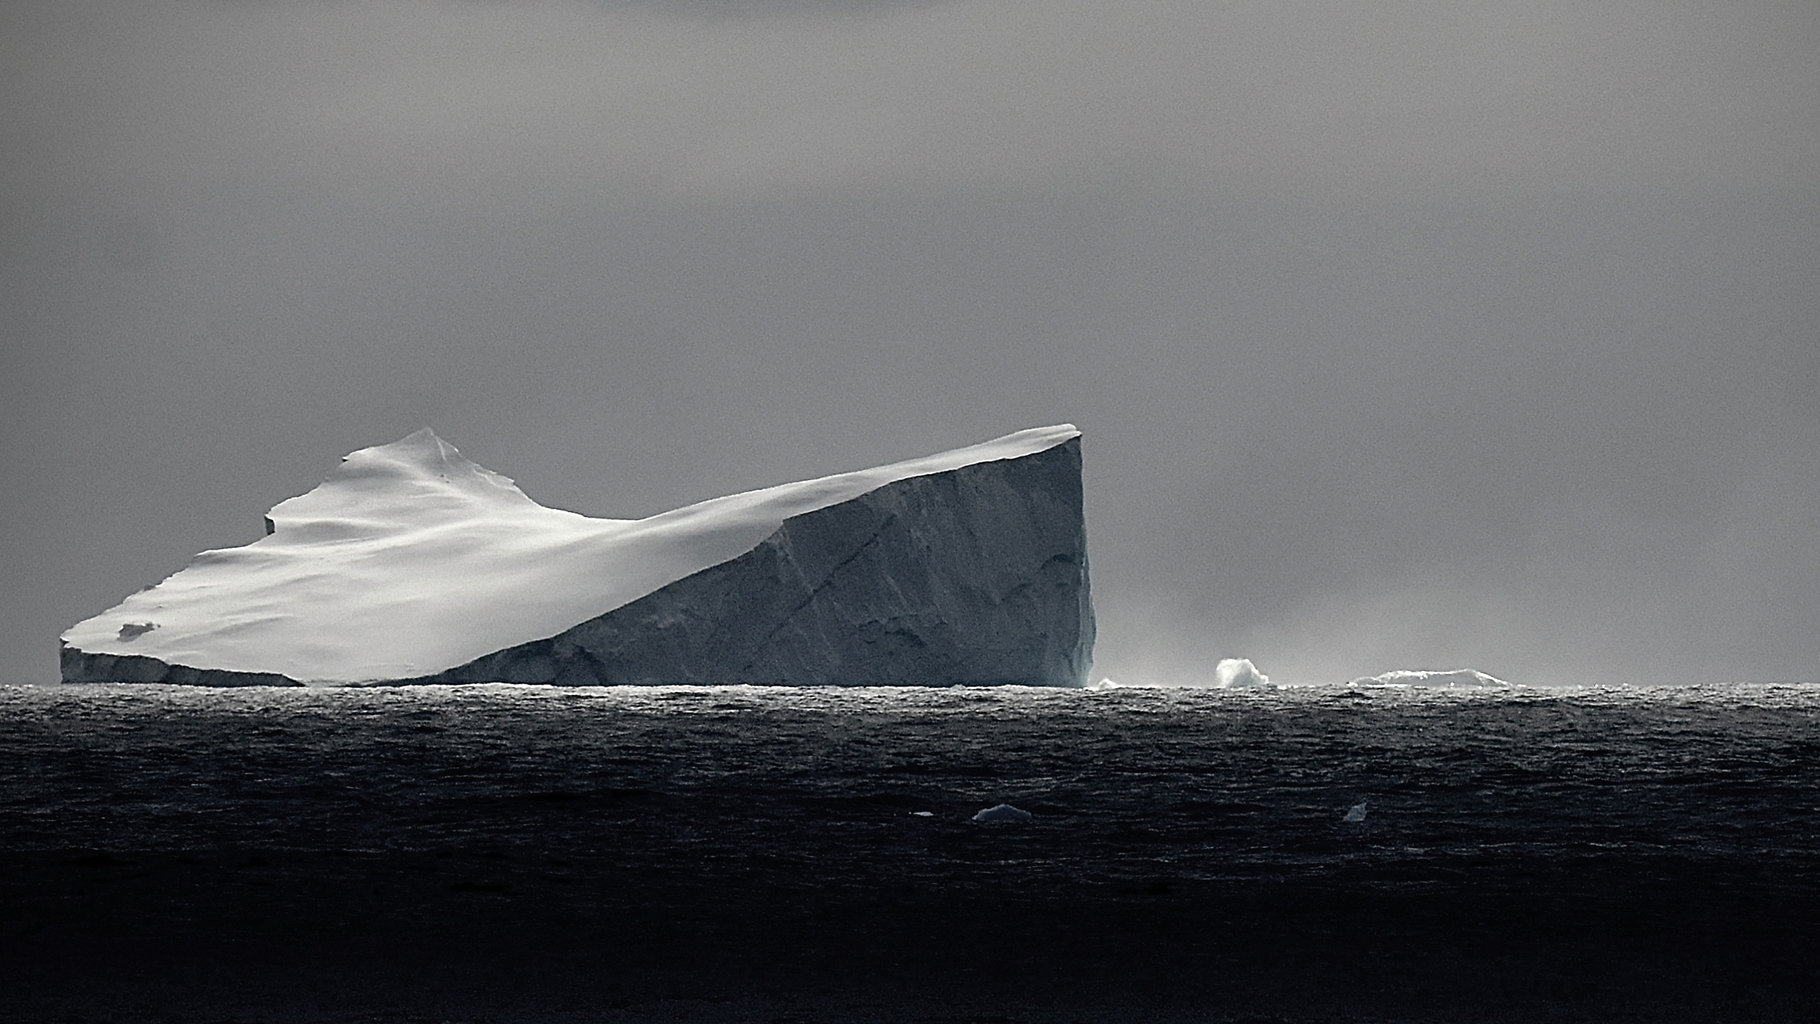 One of the final iceberg sightings on the expedition.